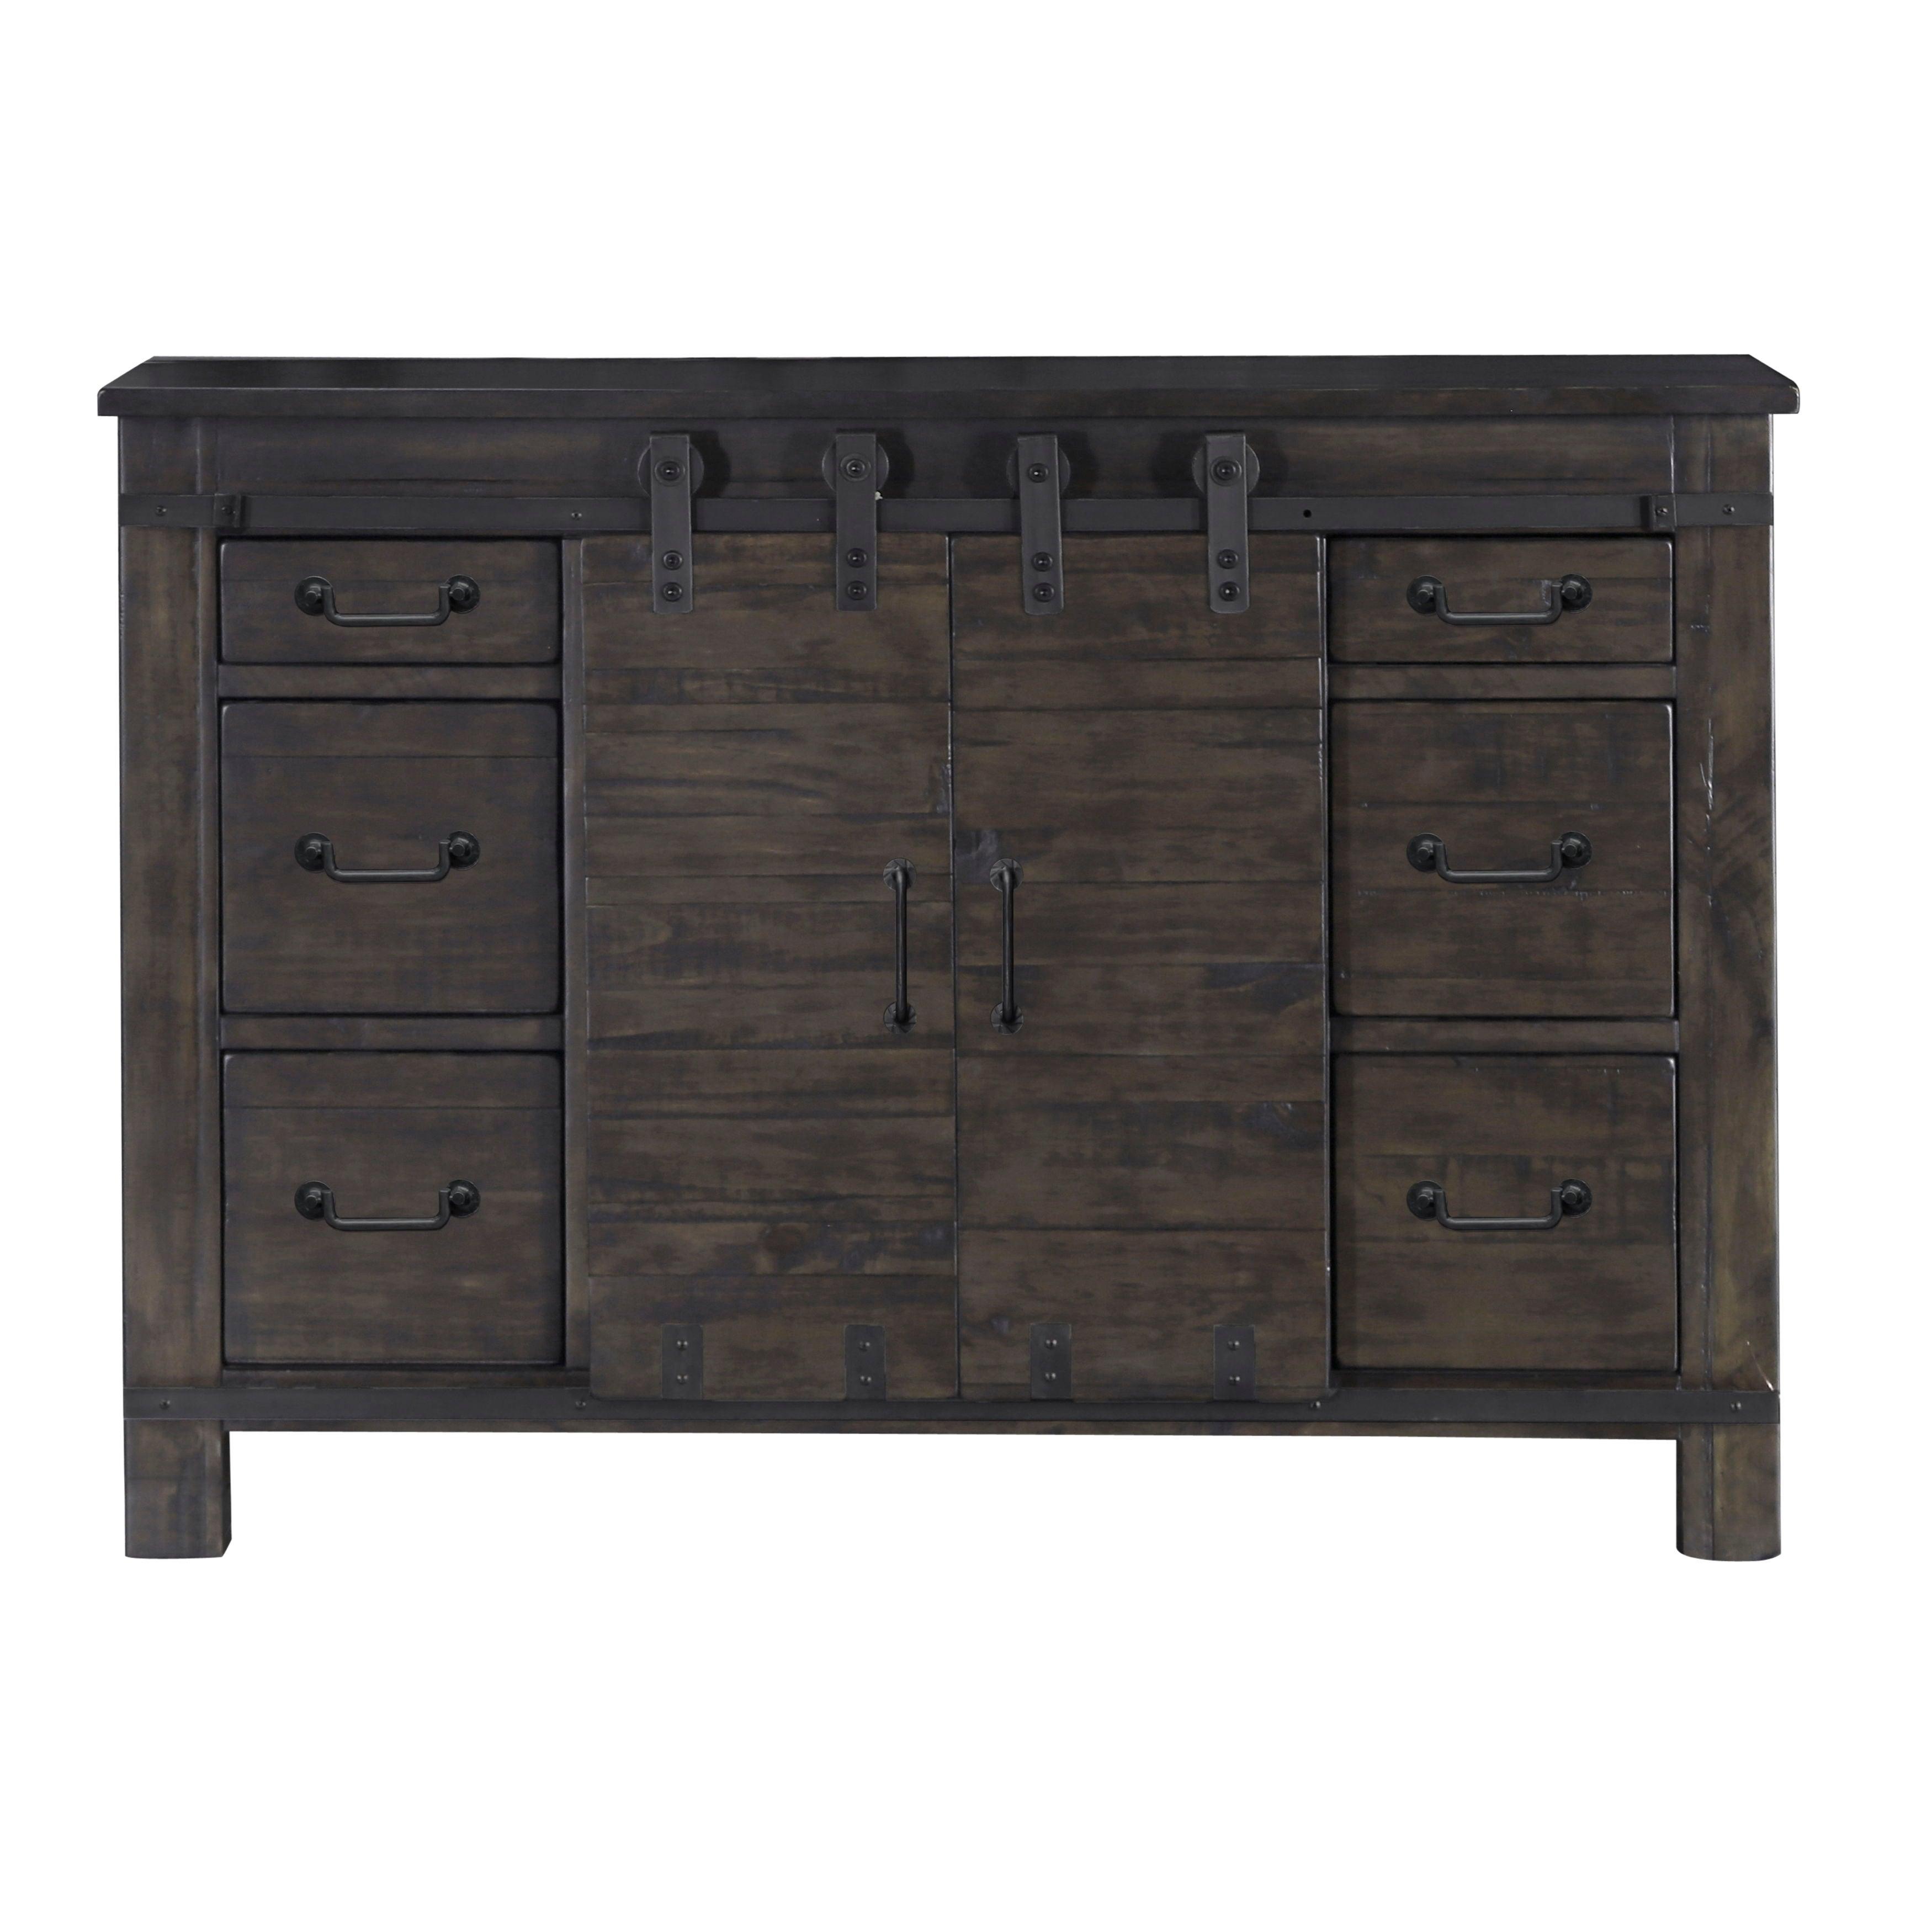 Magnussen Furniture - Abington - Media Chest - Weathered Charcoal - 5th Avenue Furniture